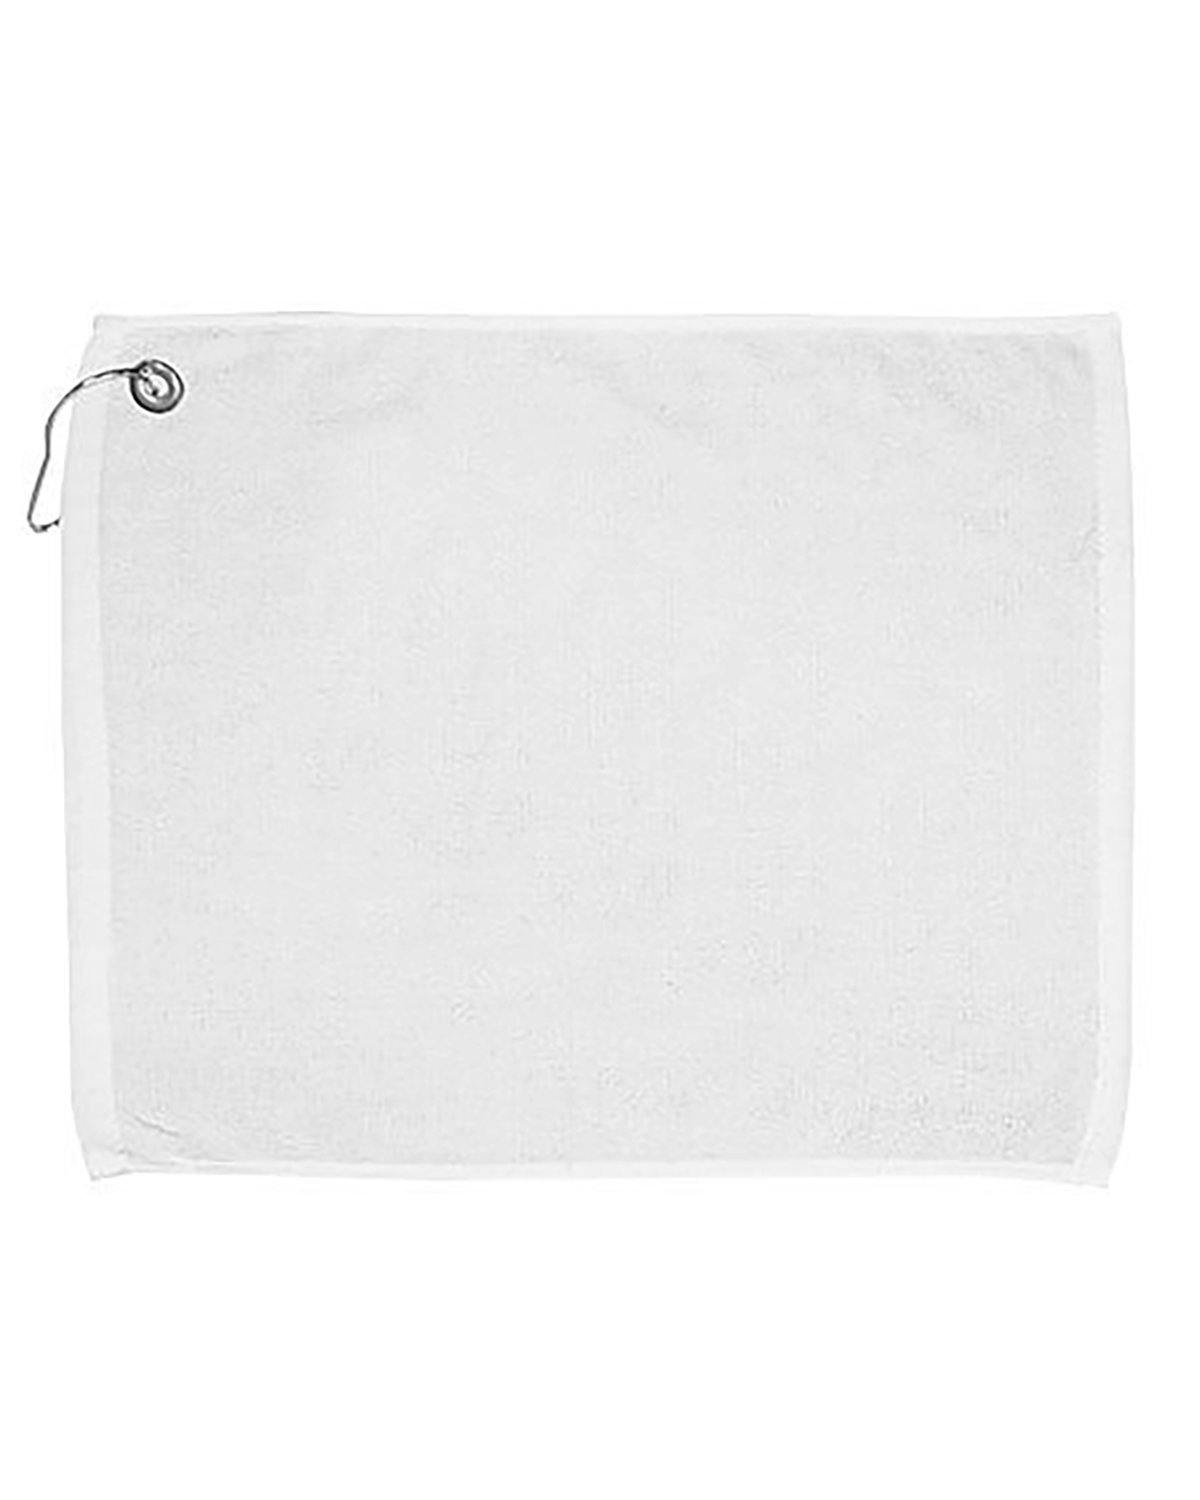 Image for Golf Towel with Grommet and Hook